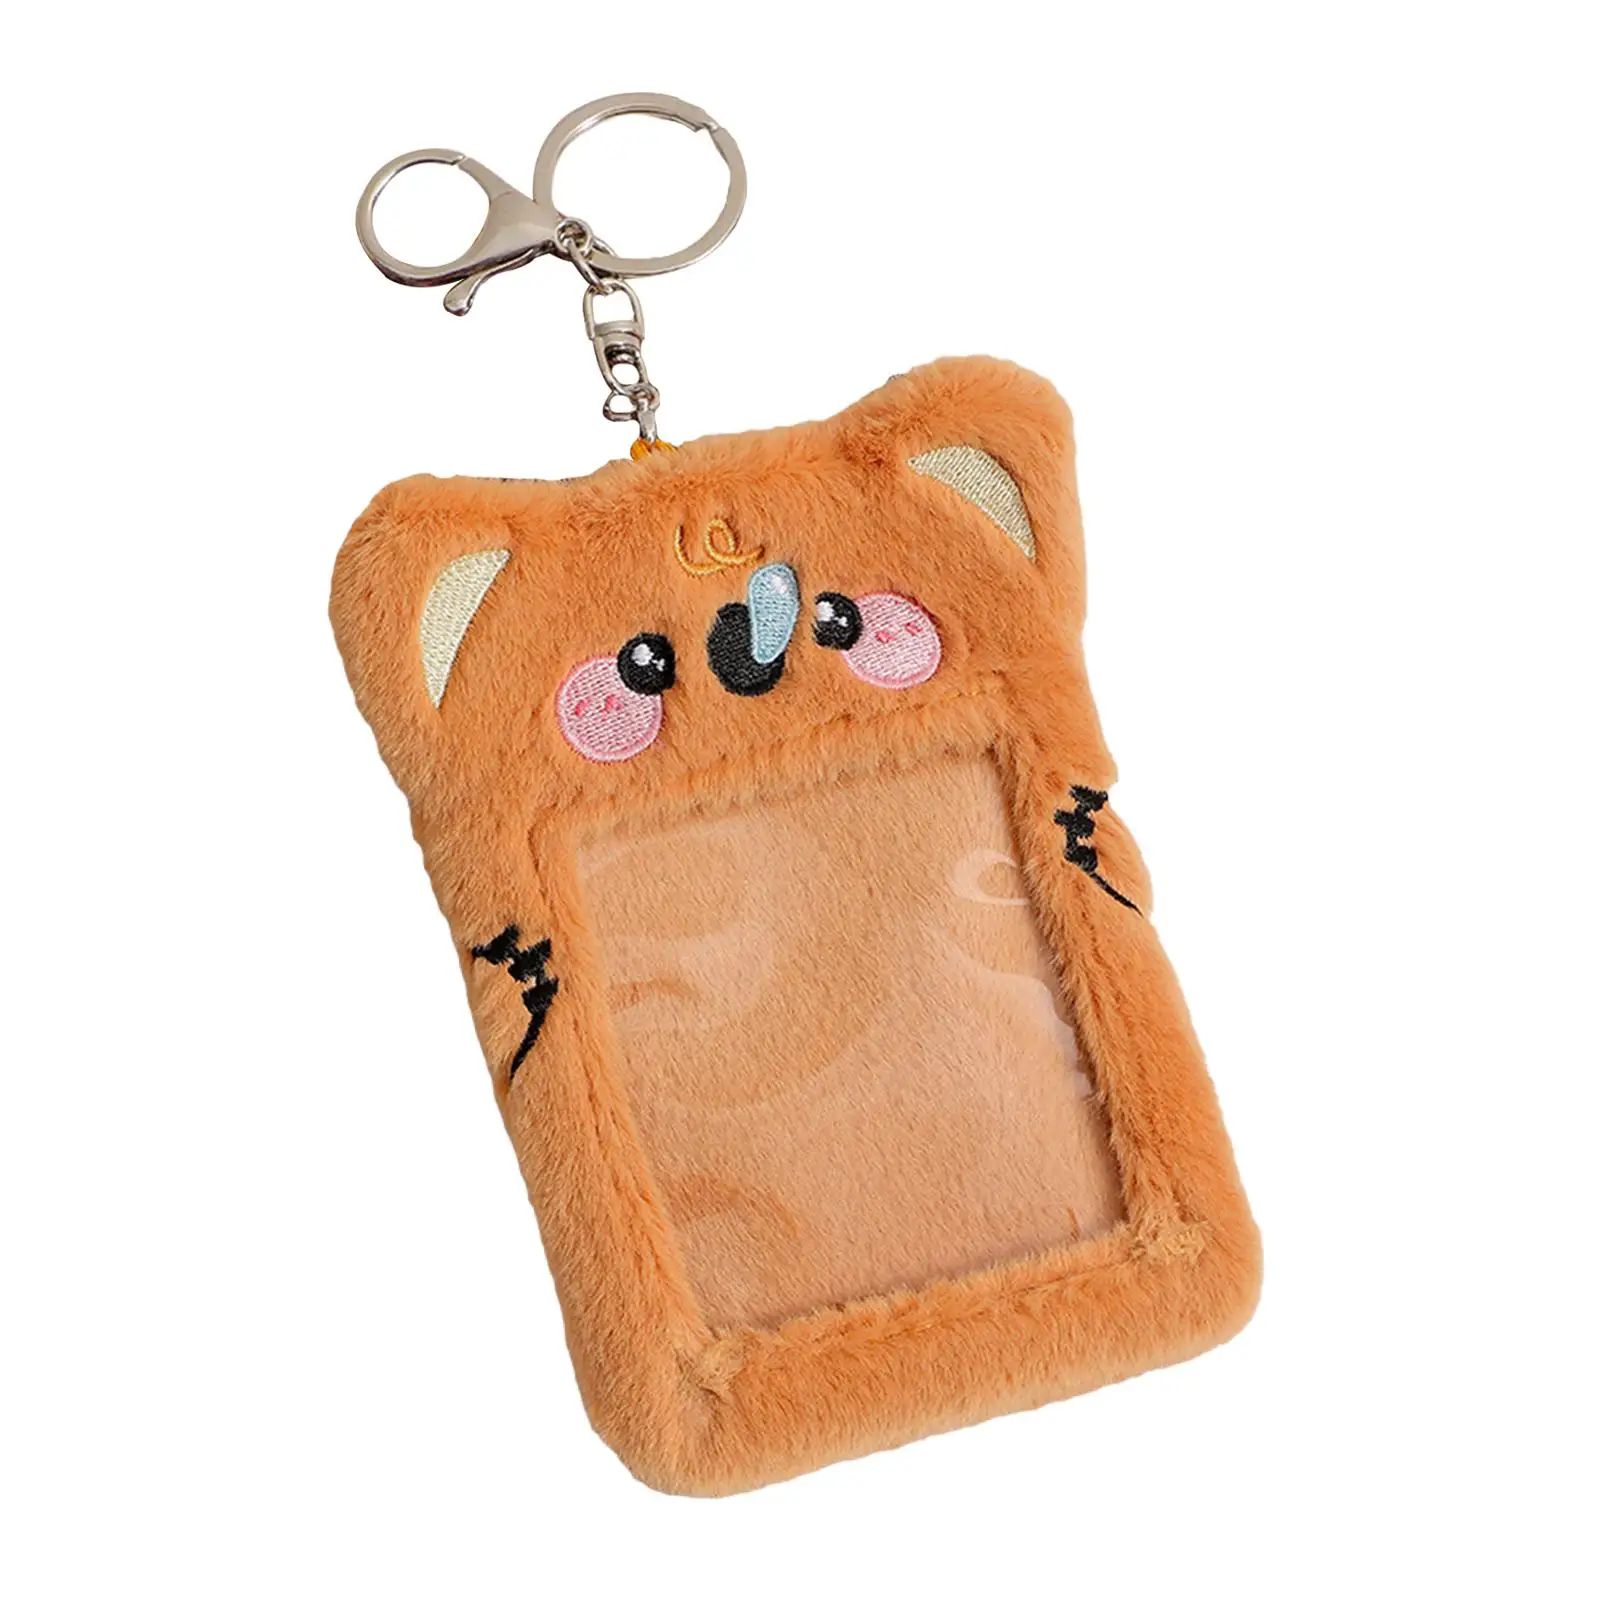 Cute Plush Photocard Holder ID Card Cover Bag Idol Photo Storage Card for Birthday Gift Outside Football Cards